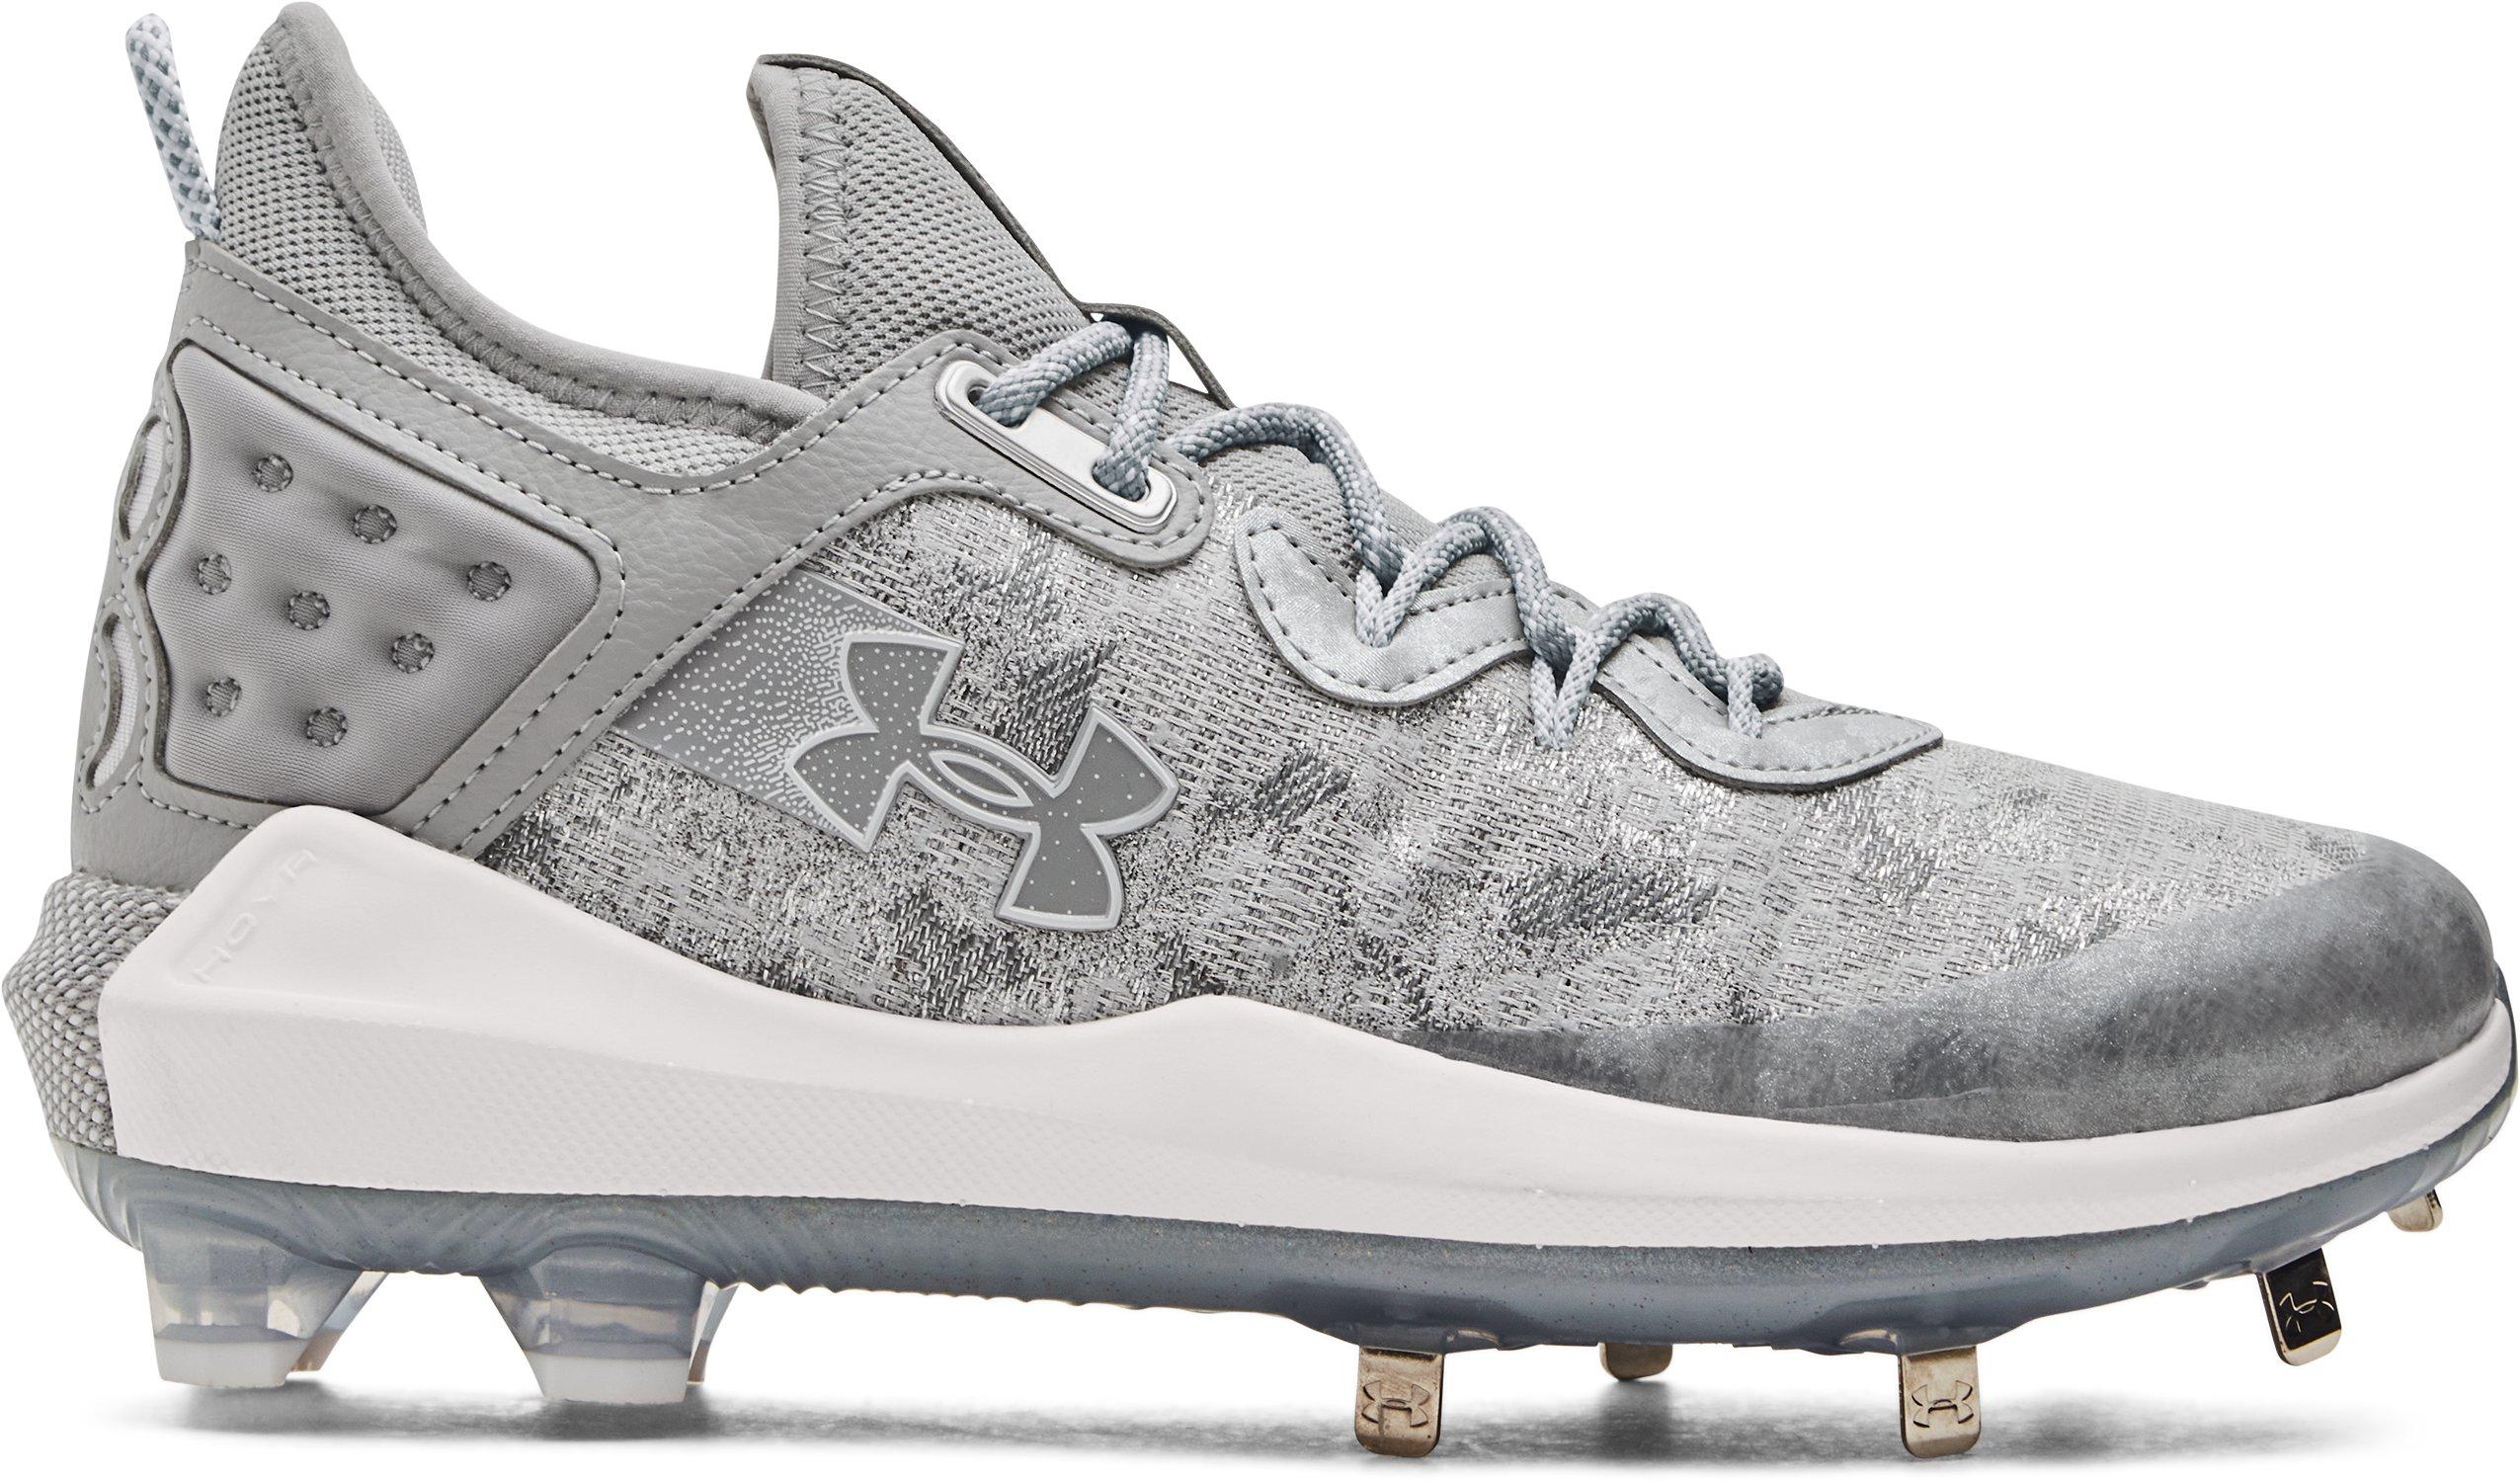 Under Armour Harper 7 Mid RM Mens Baseball Cleats - Gray / White 11